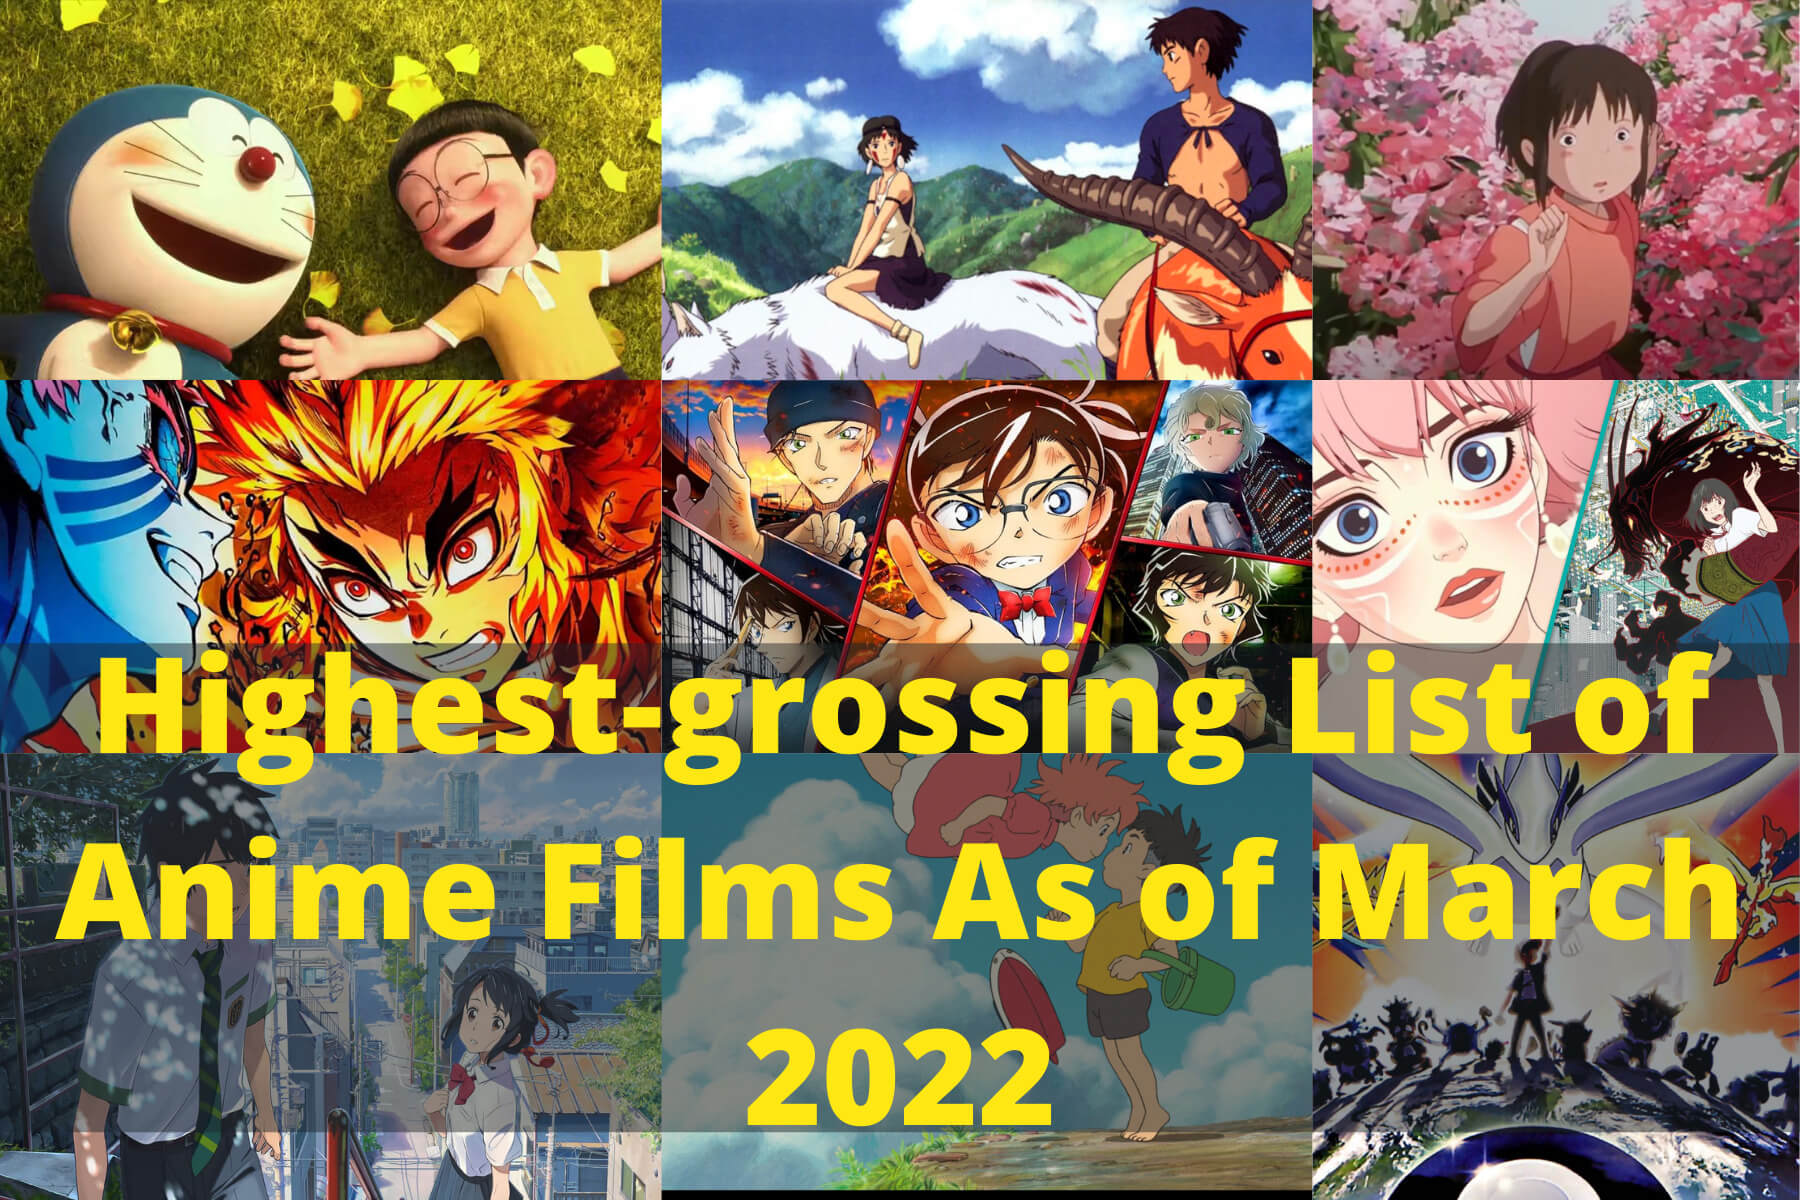 Talk: Animation That Grows Up With You: A Girls' Anime Franchise Turns 20 -  Expanded Animation